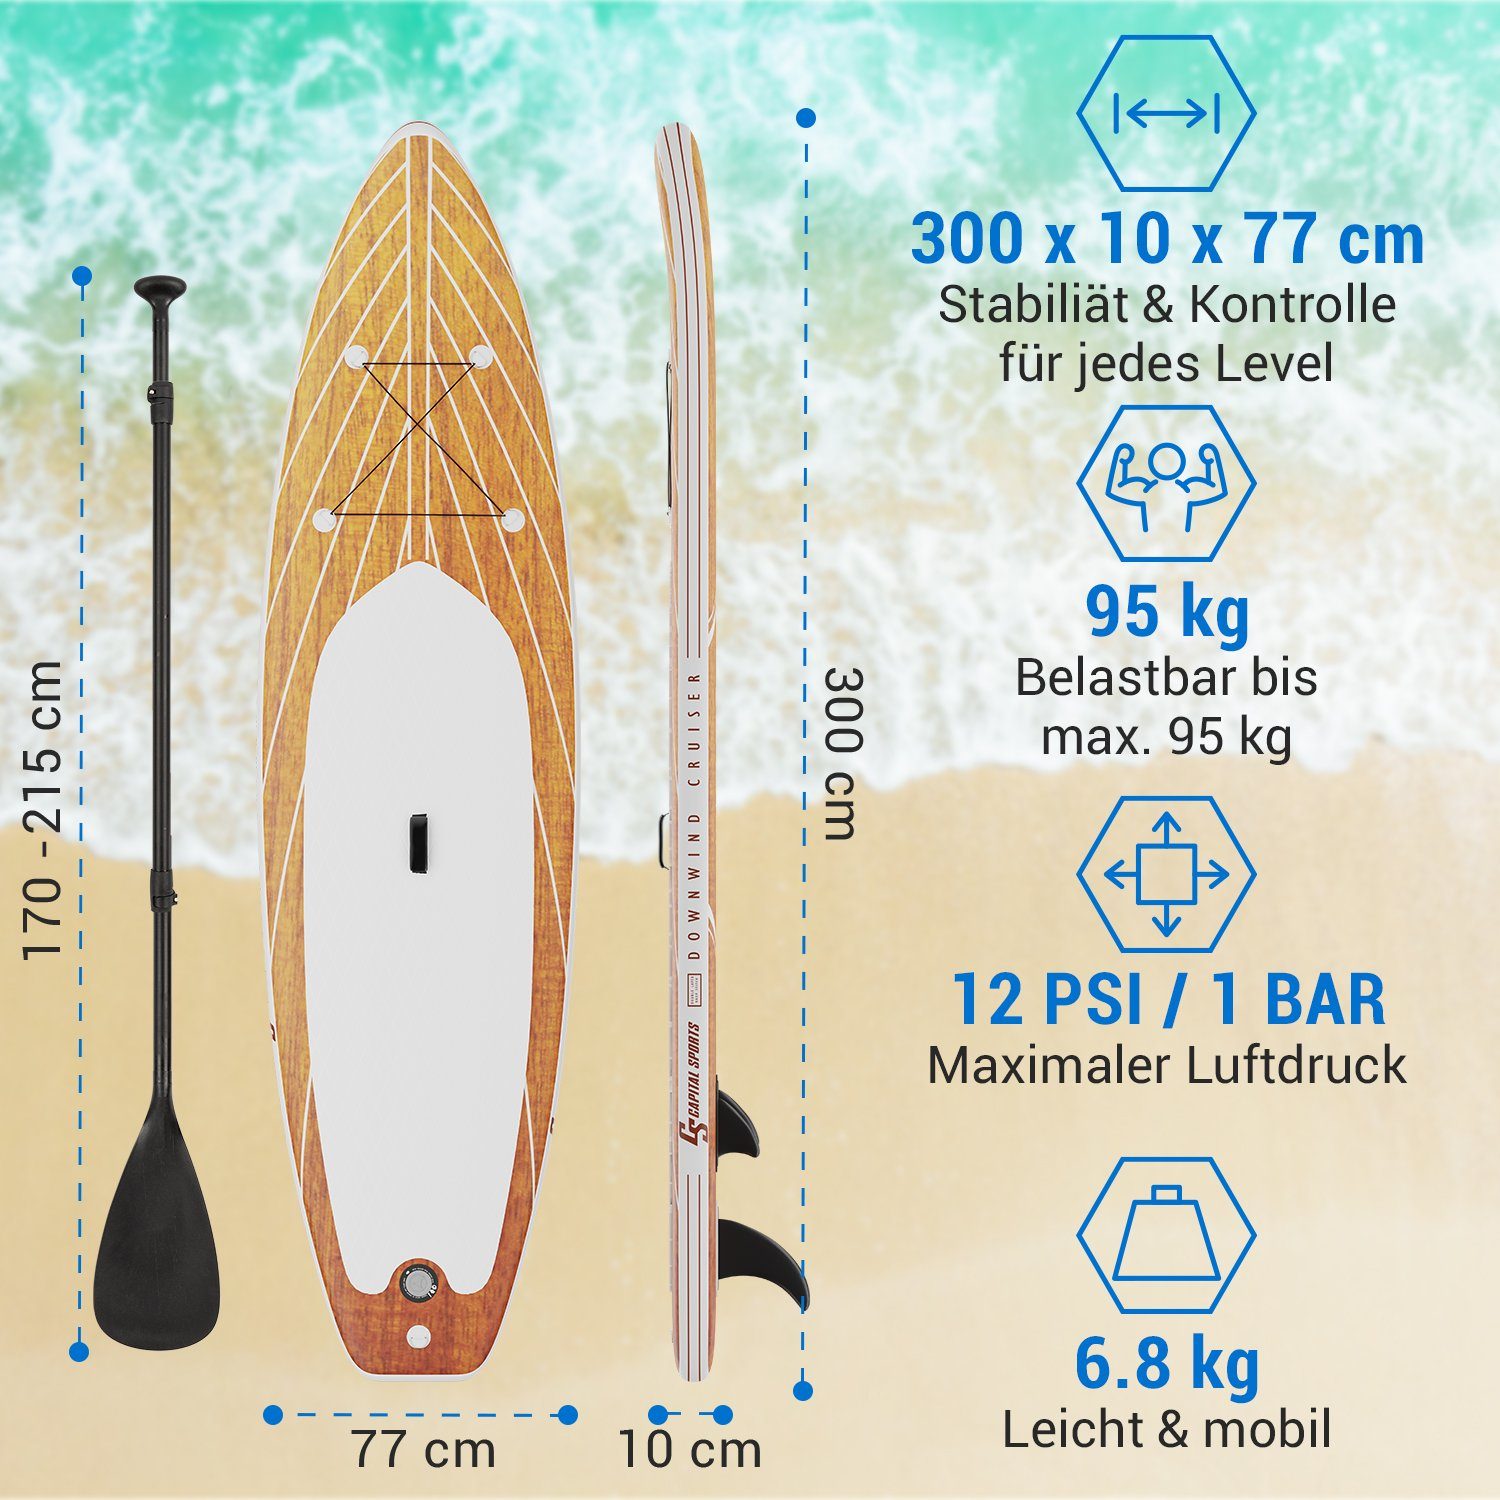 Paddle Board Inflatable 9.8, SUP Stand (Set), Up Standup Board Capital Board SUP-Board Paddel Paddle Cruiser Board, Board Paddling Sports Downwind